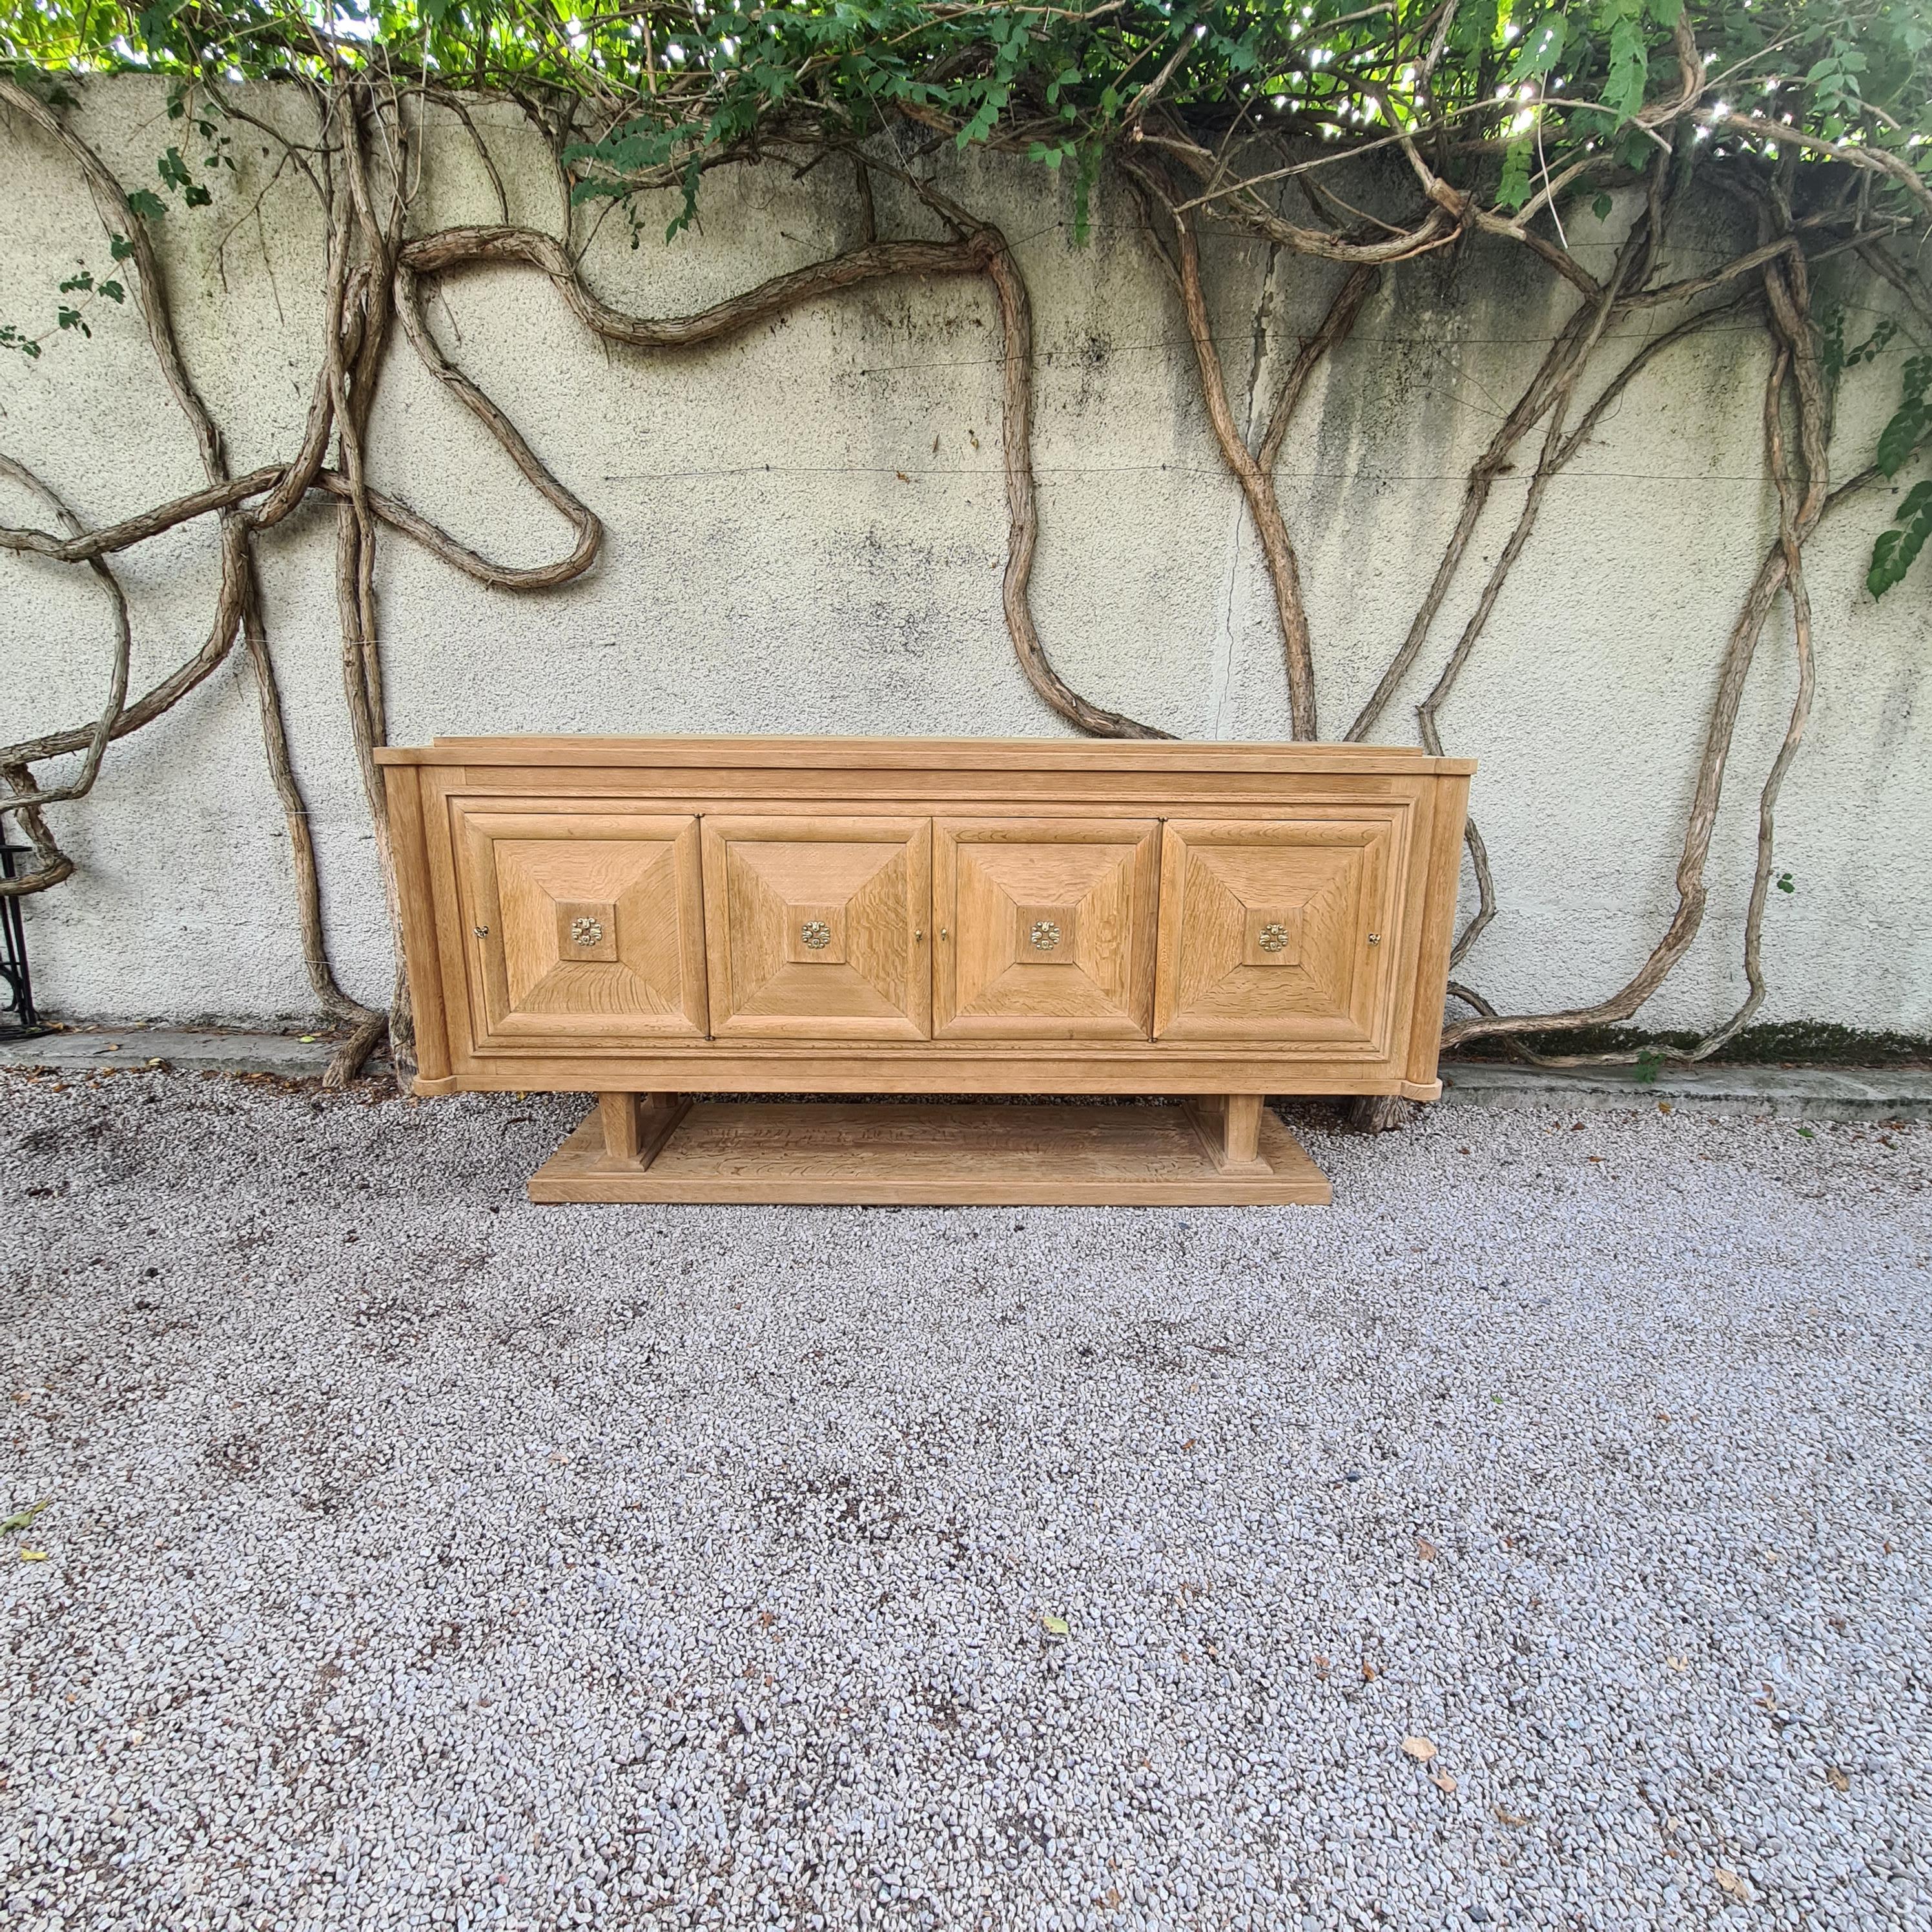 Magnificent art deco sideboard circa 1930, consists of 4 inverted opening doors, 2 central drawers. Door details, keyholes and finishes are in brass. Nice honey-coloured patina, some minimal traces of wear and tear on the top, an incredible art deco